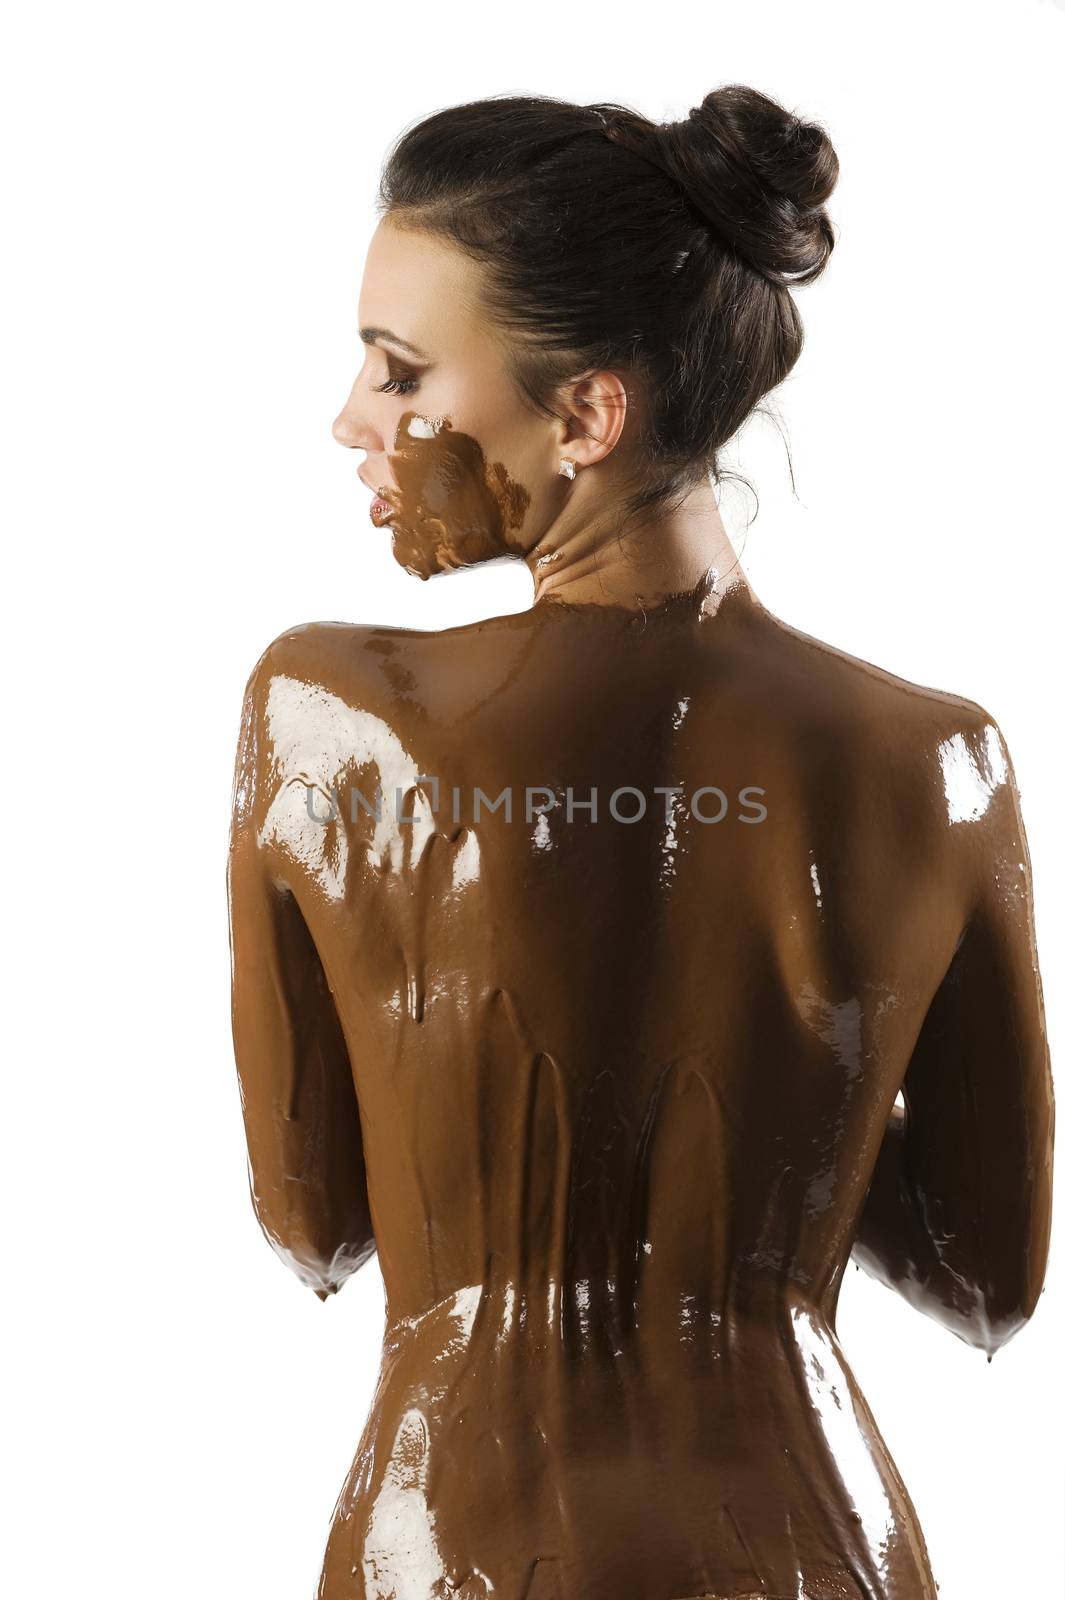 the chocolate girl by fotoCD